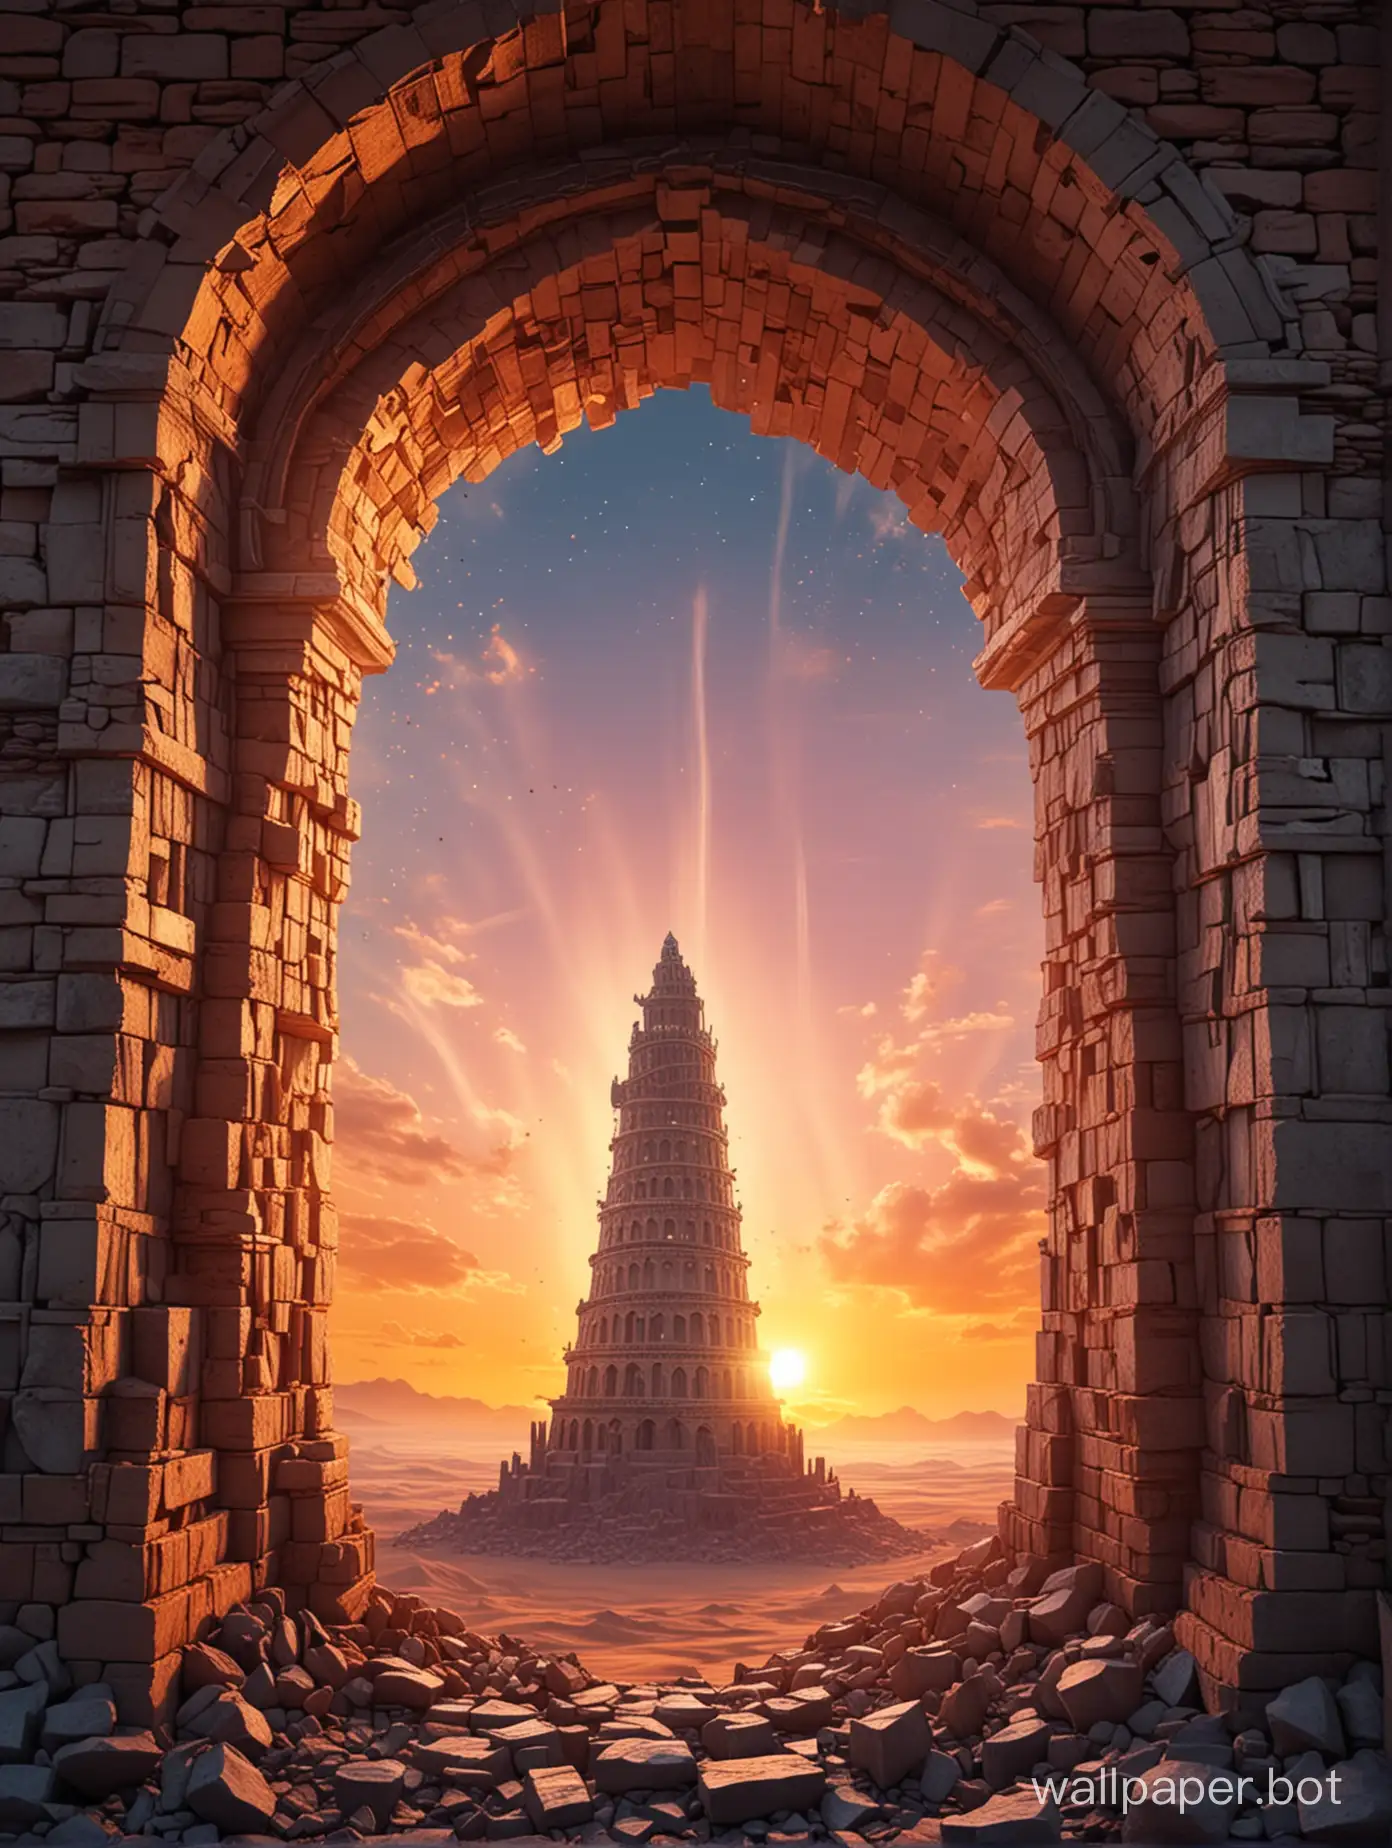 SciFi-Tower-of-Babel-Silhouetted-Against-a-Sunset-Sky